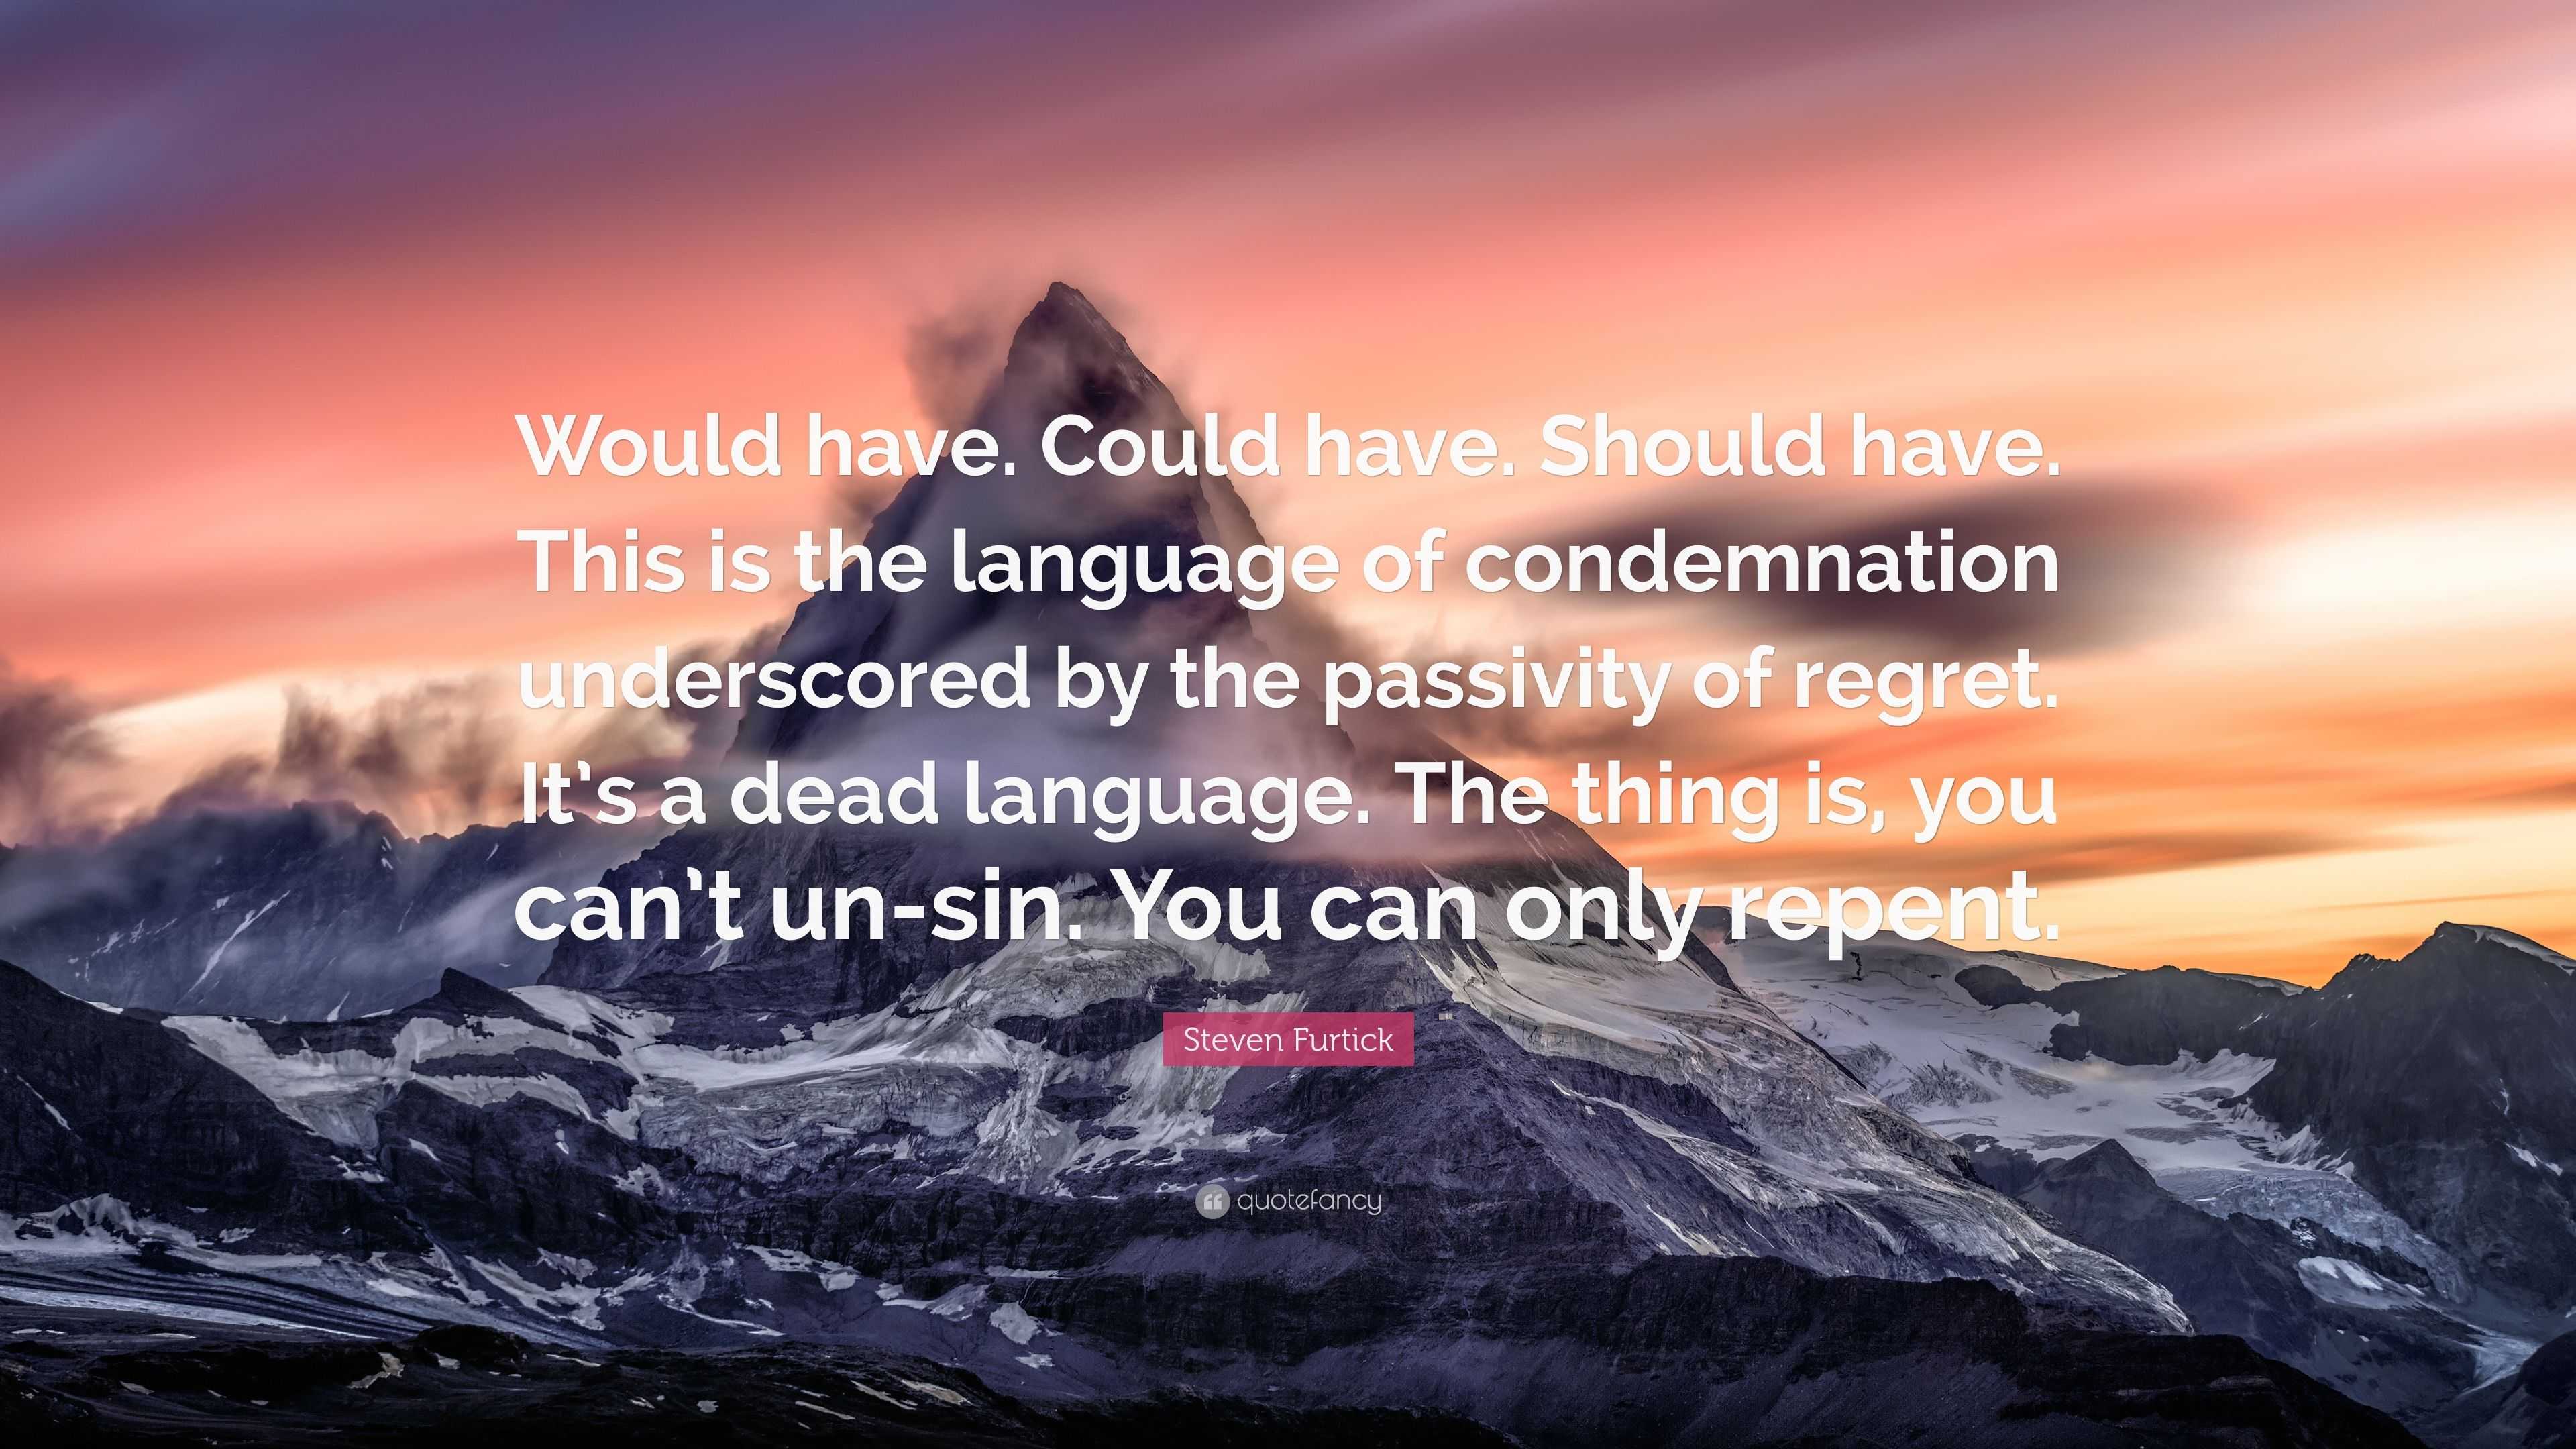 Steven Furtick Quote: “Would have. Could have. Should have. This is the  language of condemnation underscored by the passivity of regret. It's a”